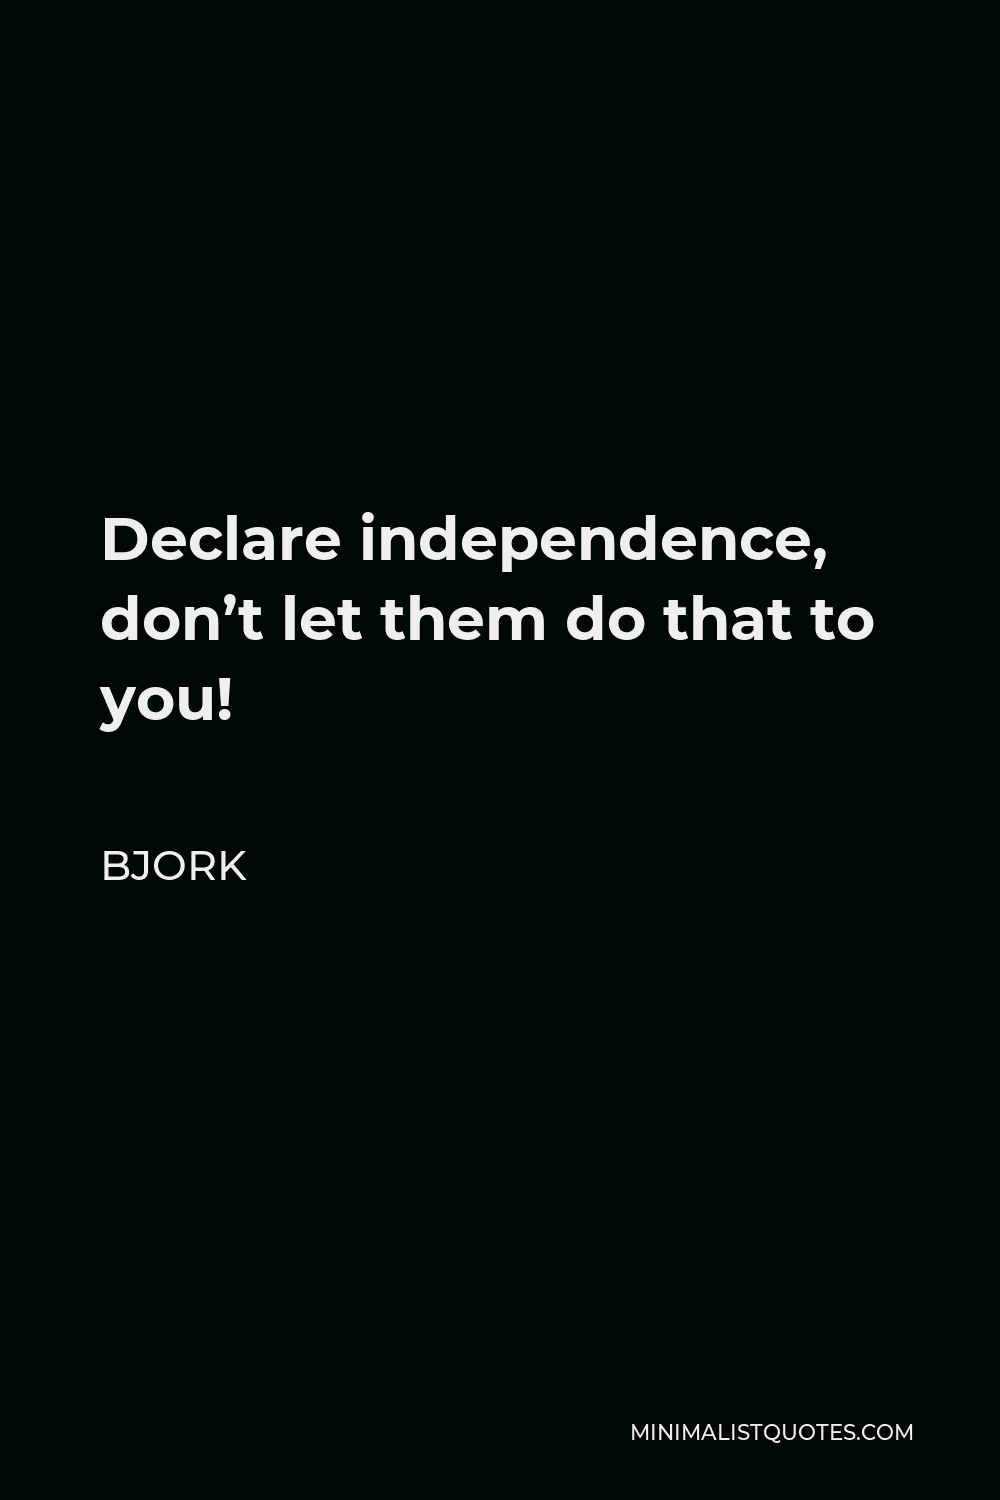 Bjork Quote - Declare independence, don’t let them do that to you!